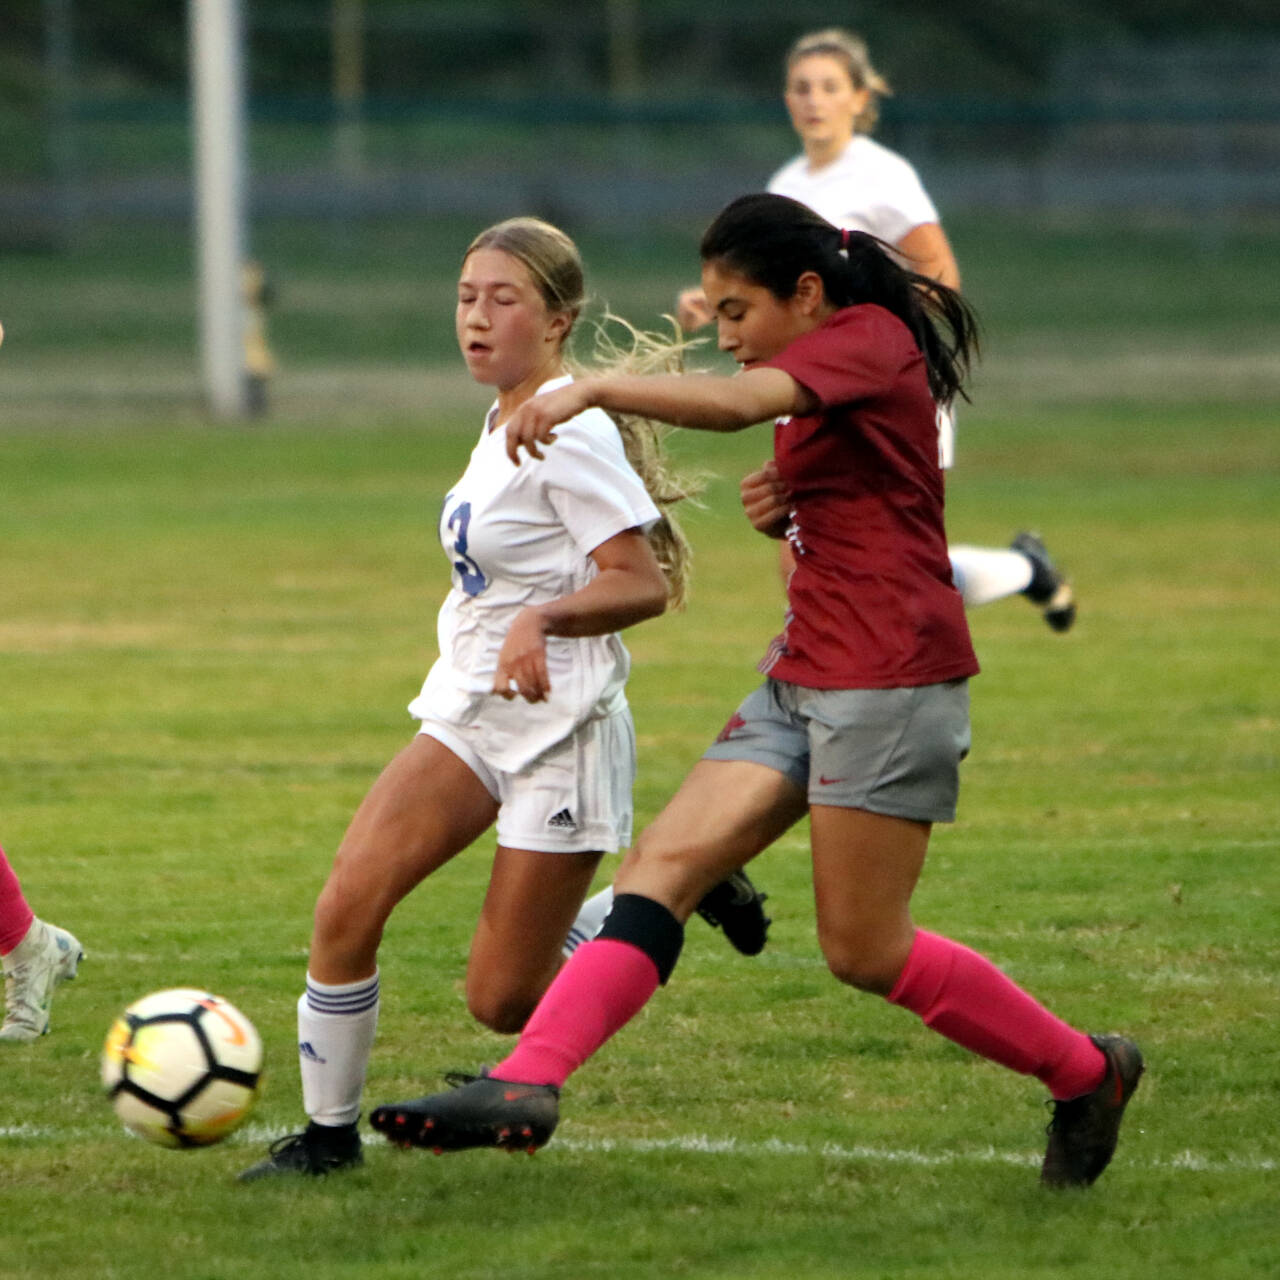 PHOTO BY BEN WINKELMAN Hoquiam’s Yazmin Garcia-Lopez, right, dribbles against Eatonville’s Haley Courson during the Grizzlies shootout loss on Tuesday at Olympic Stadium in Hoquiam.